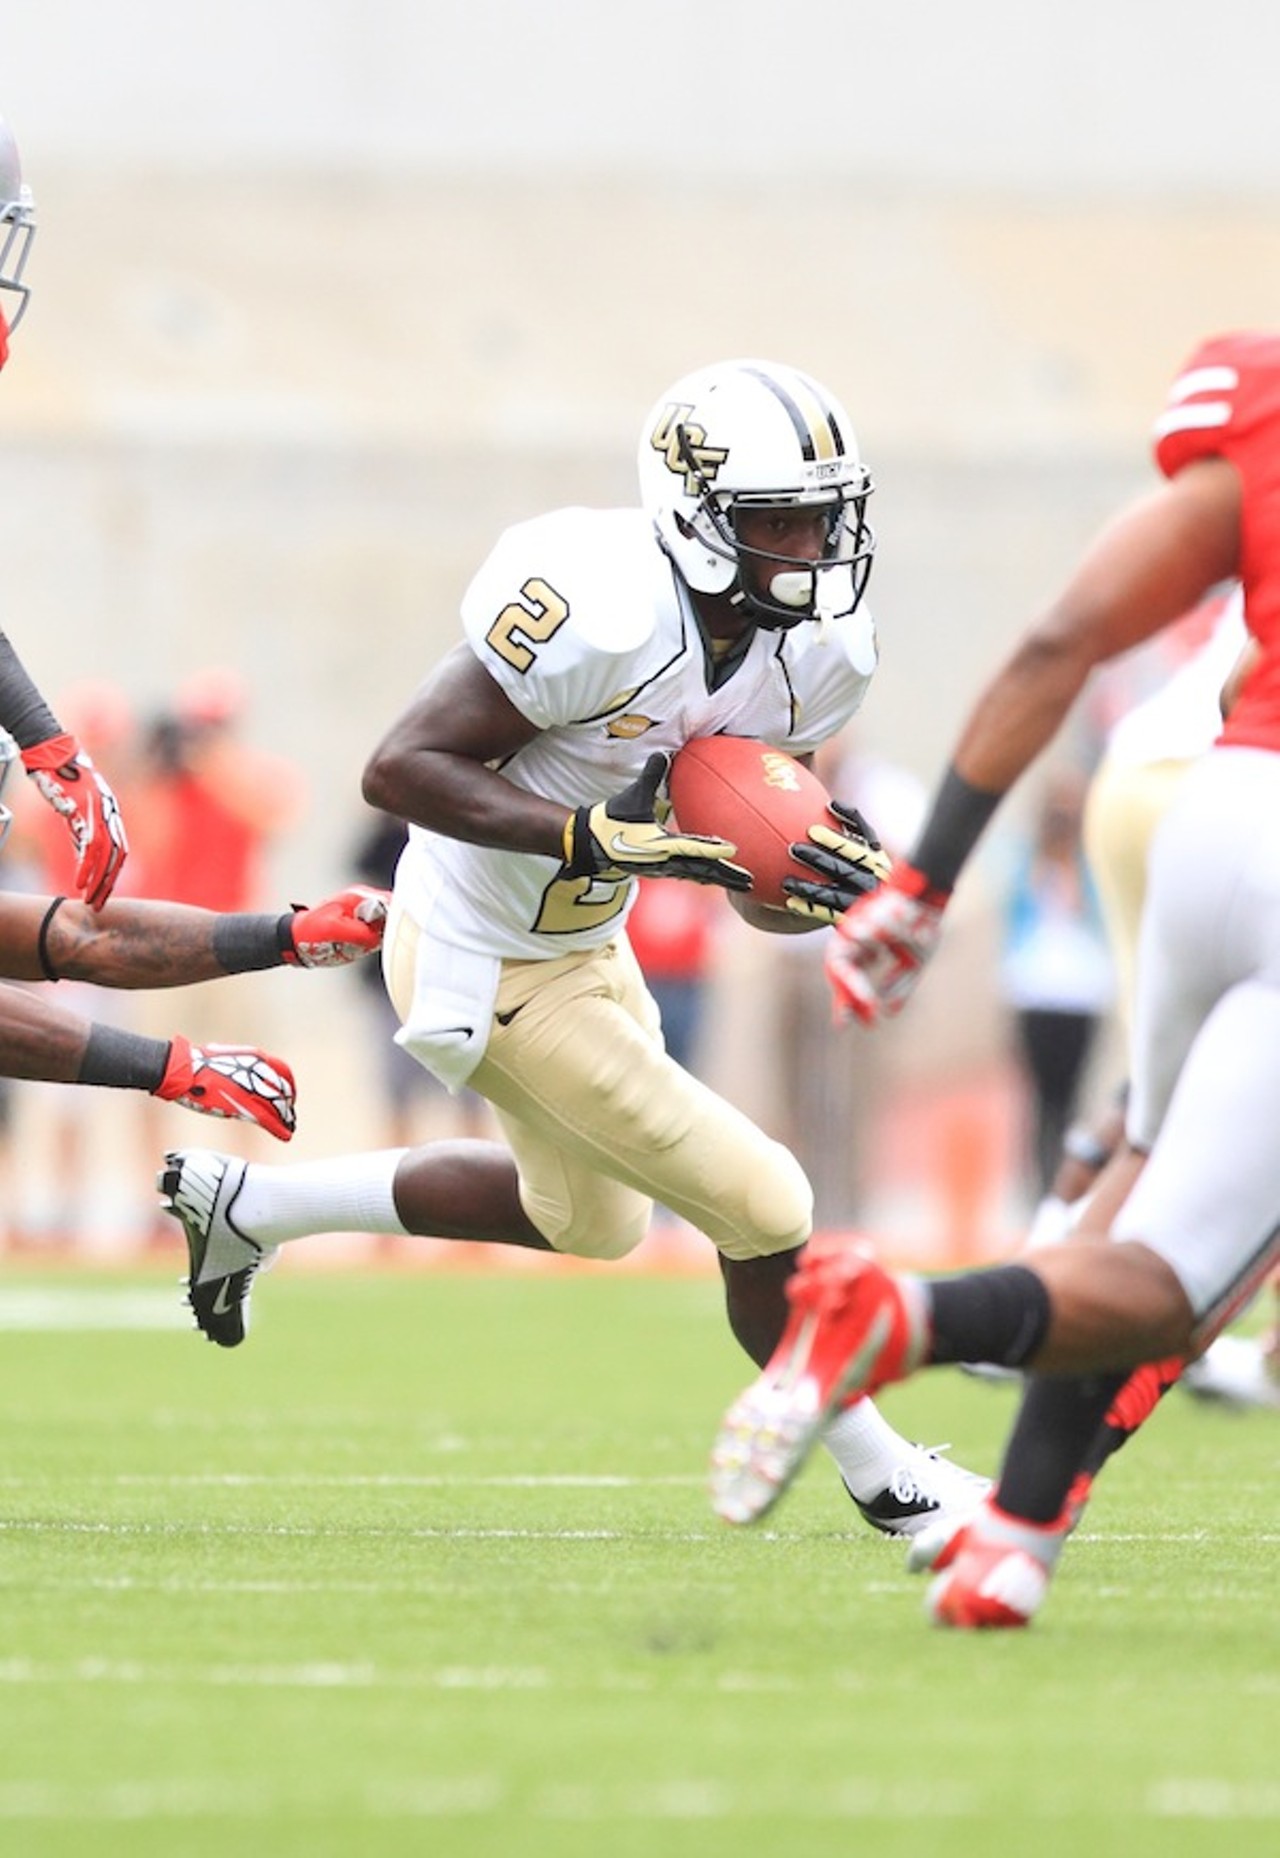 UCF Knights vs. Akron Zips
Thursday, Aug. 29
7 p.m.
Bright House Networks Stadium, University of Central Florida
407-823-1000
ucfathletics.com
$10-$60
We feel like we say this every year, but this year really could be the year for the UCF Knights football team to prove something. Most would consider it a year for evolution, but this season the Knights join the American Athletic Conference riding on the momentum of last year&#146;s 10-4 overall record and a Beef O&#146;Brady&#146;s Bowl victory. Not to mention the nearly decade-long coaching chops of George O&#146;Leary, plus on-the-field leadership under returning quarterback Blake Bortles. But shiny new conference and stacked roster aside, the Knights have some high non-conference hurdles ahead of them, including a home game rendezvous with UCF&#146;s most anticipated and daunting opponent, Steve Spurrier&#146;s South Carolina Gamecocks (ranked No. 6 in the AP Top 25 preseason poll). Fans can only hope the Knights won&#146;t be daydreaming too far into the future, and instead will kick off the season on the right foot this week by focusing on a win over Akron. &#150; Aimee Vitek